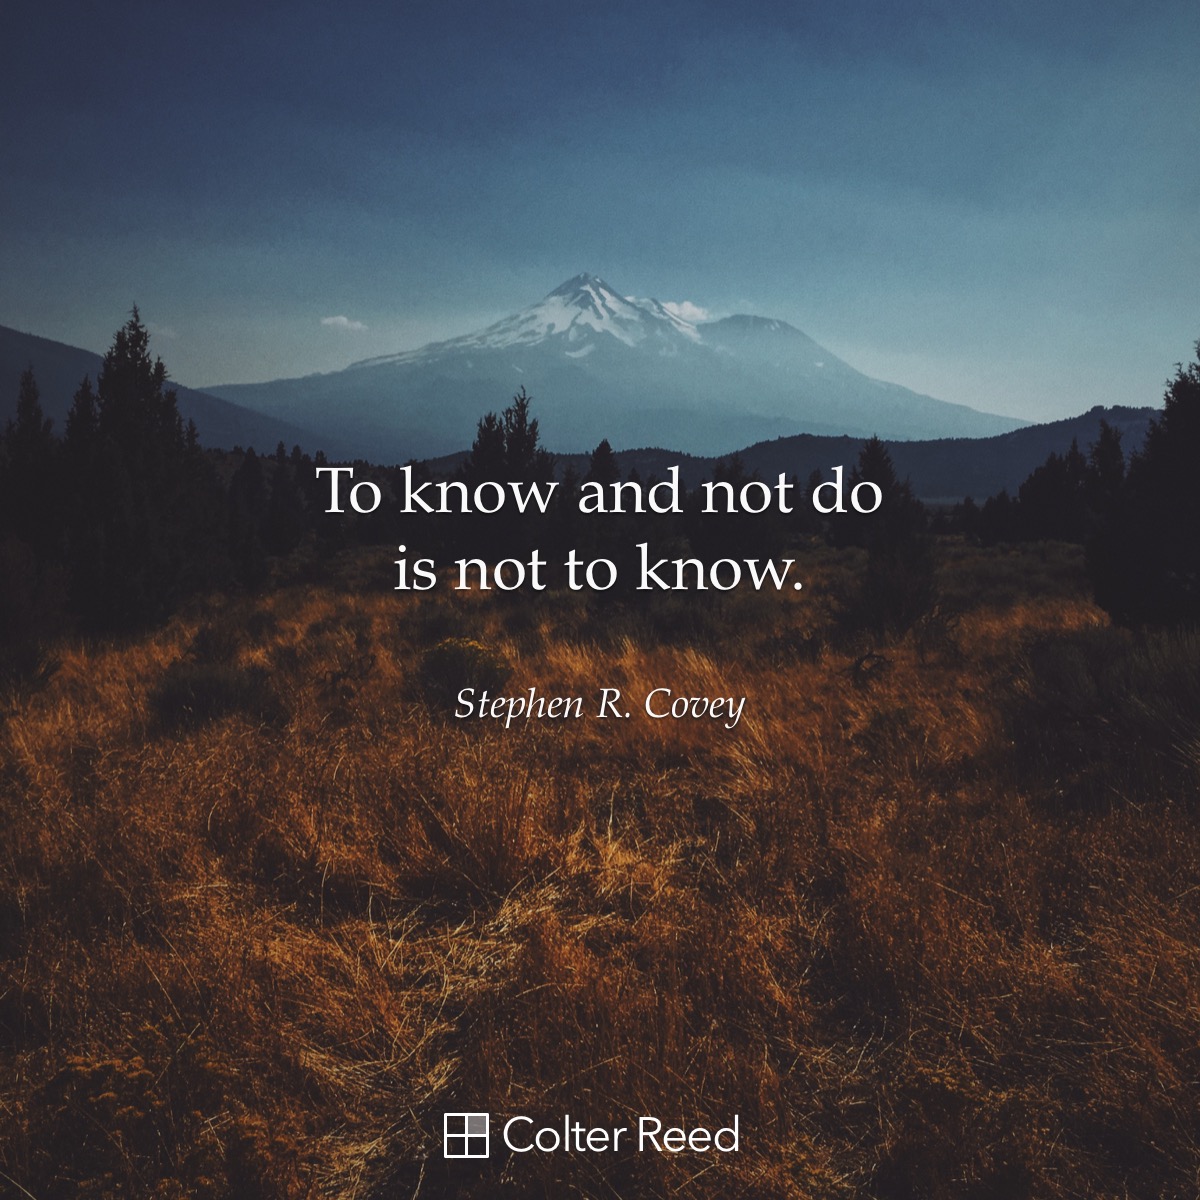 To know and not do is not to know. —Stephen R. Covey